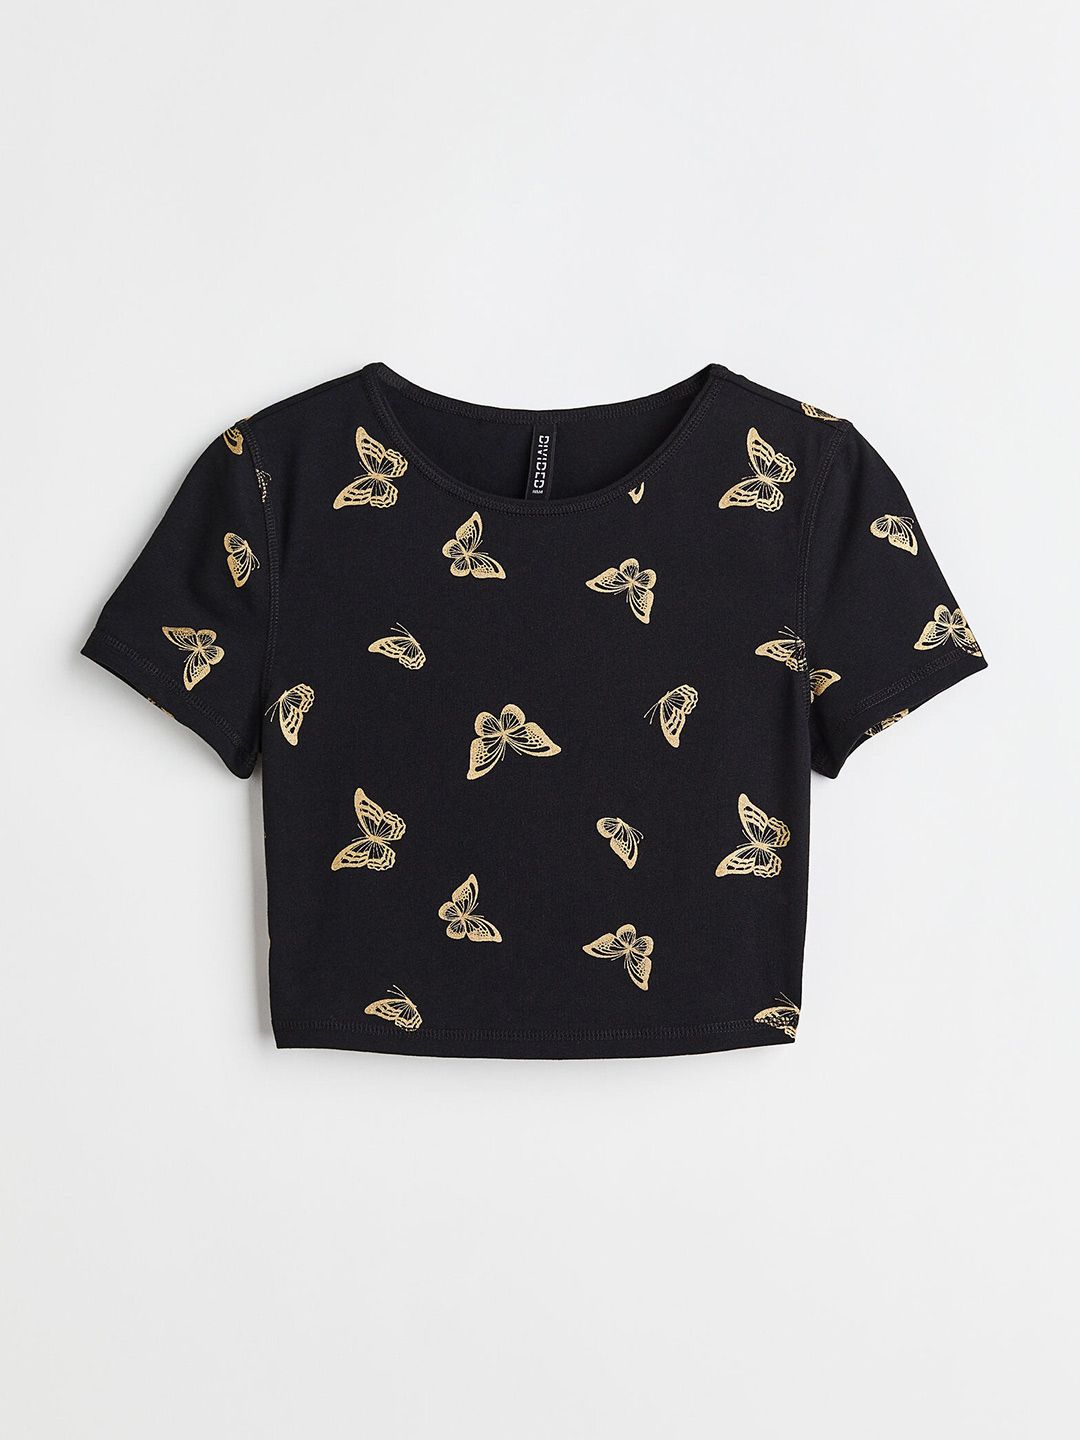 H&M Women Cropped Printed Top Price in India